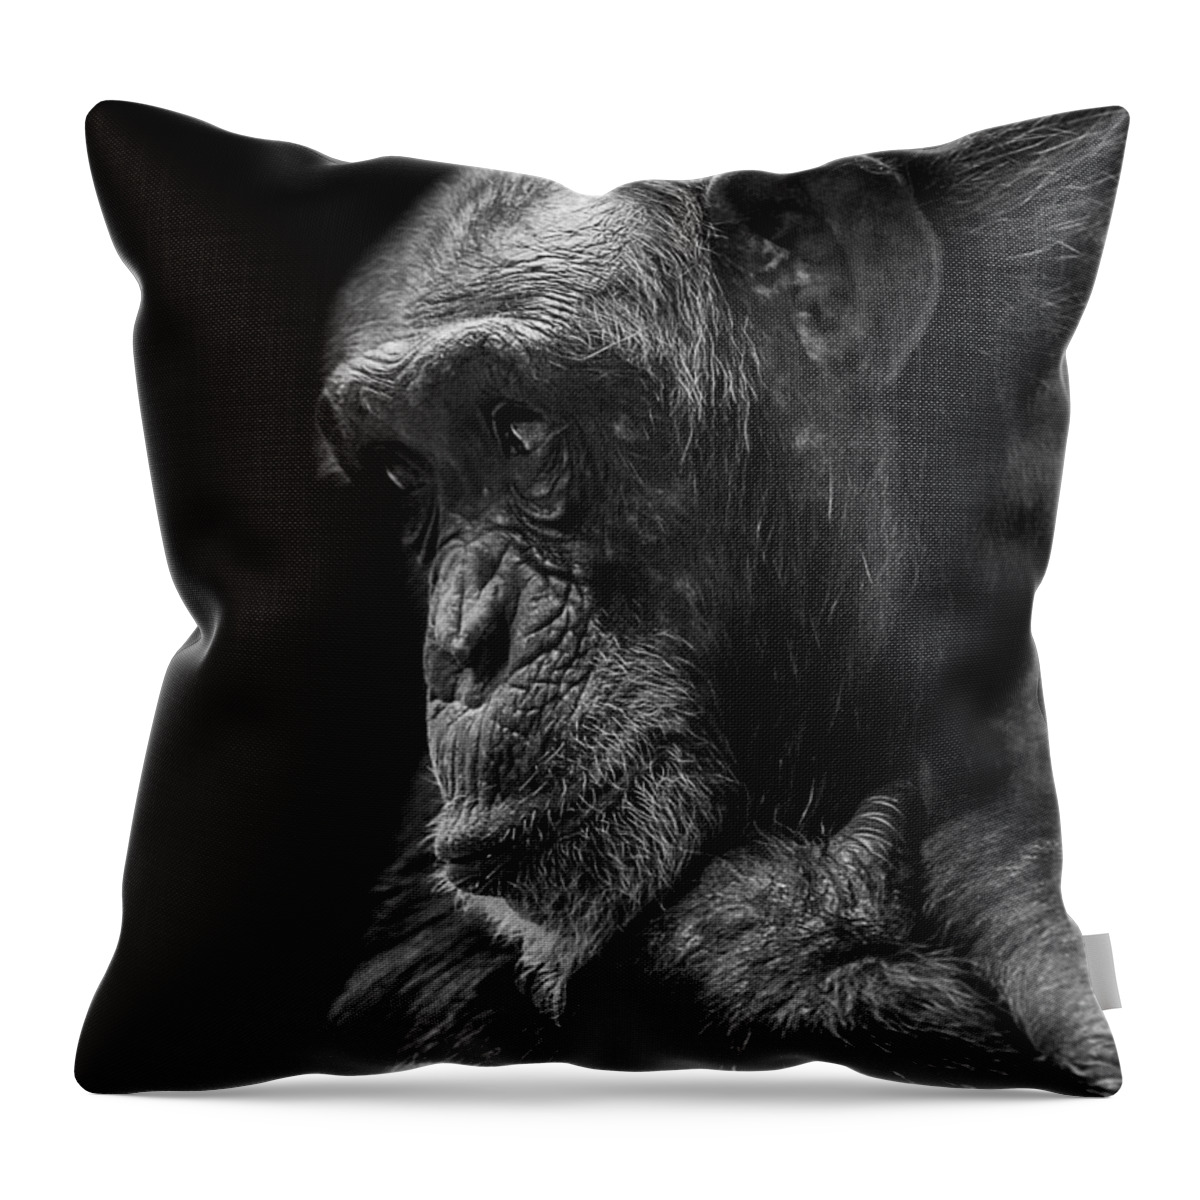 Chimpanzee Throw Pillow featuring the photograph Melancholy by Paul Neville